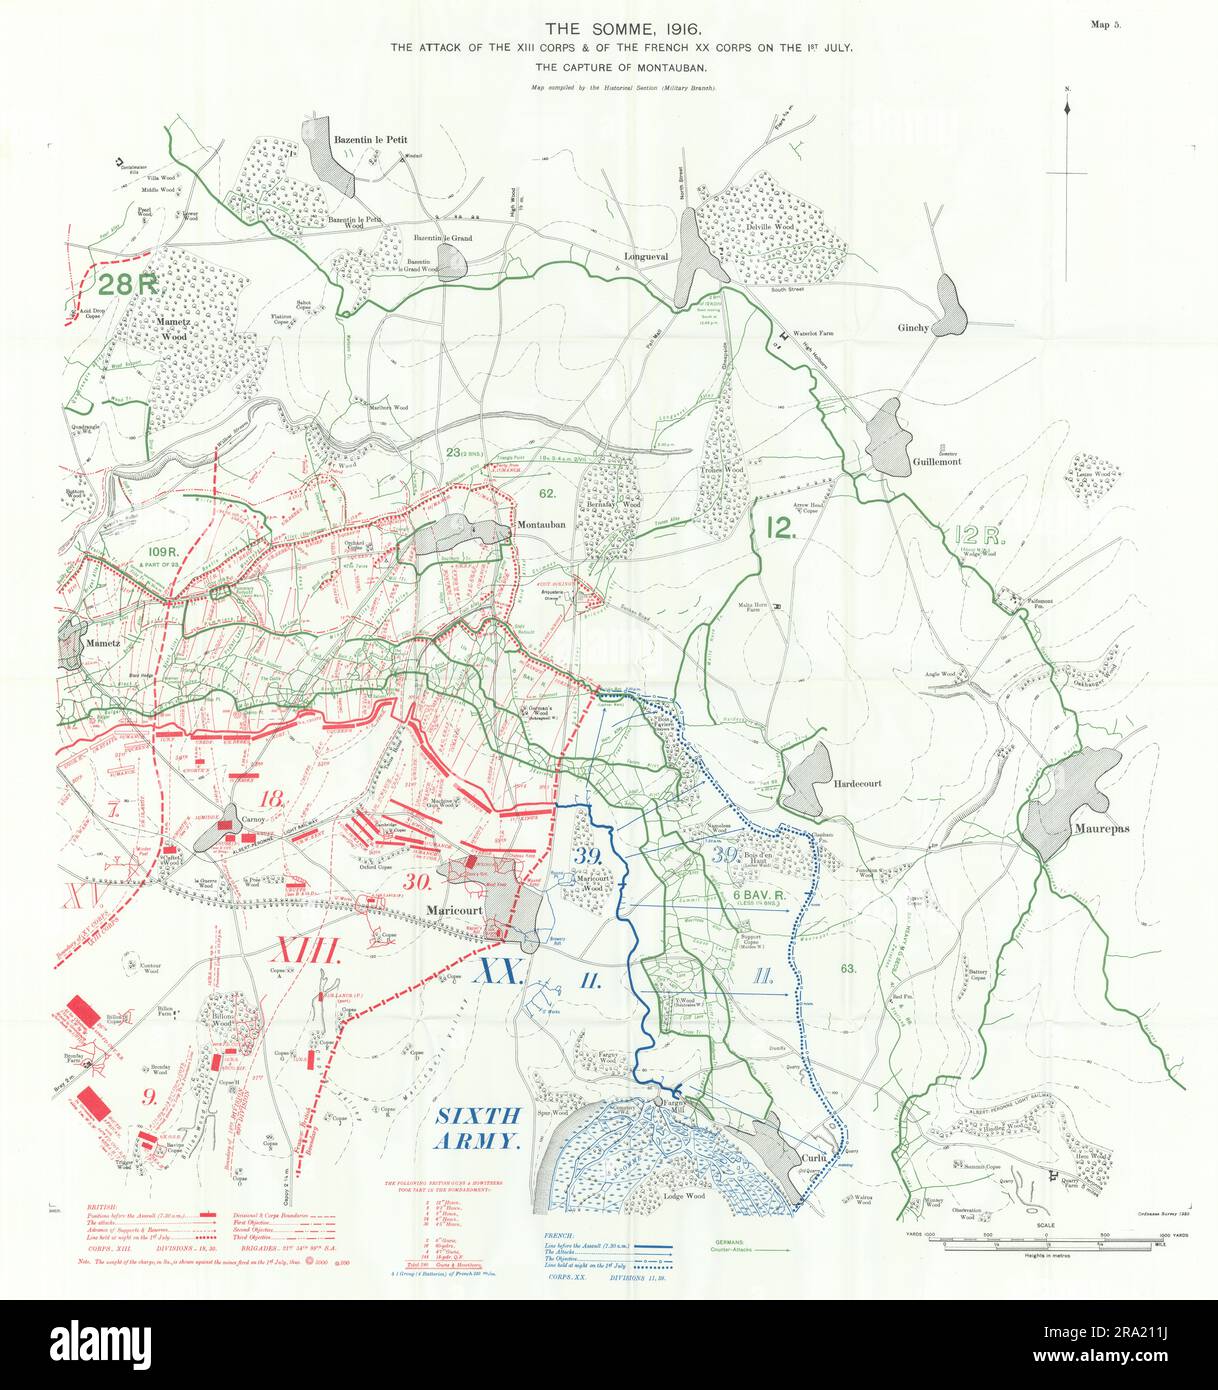 Somme 1st July 1916. XIII & French XXC Corps Mautauban capture Trenches 1932 map Stock Photo